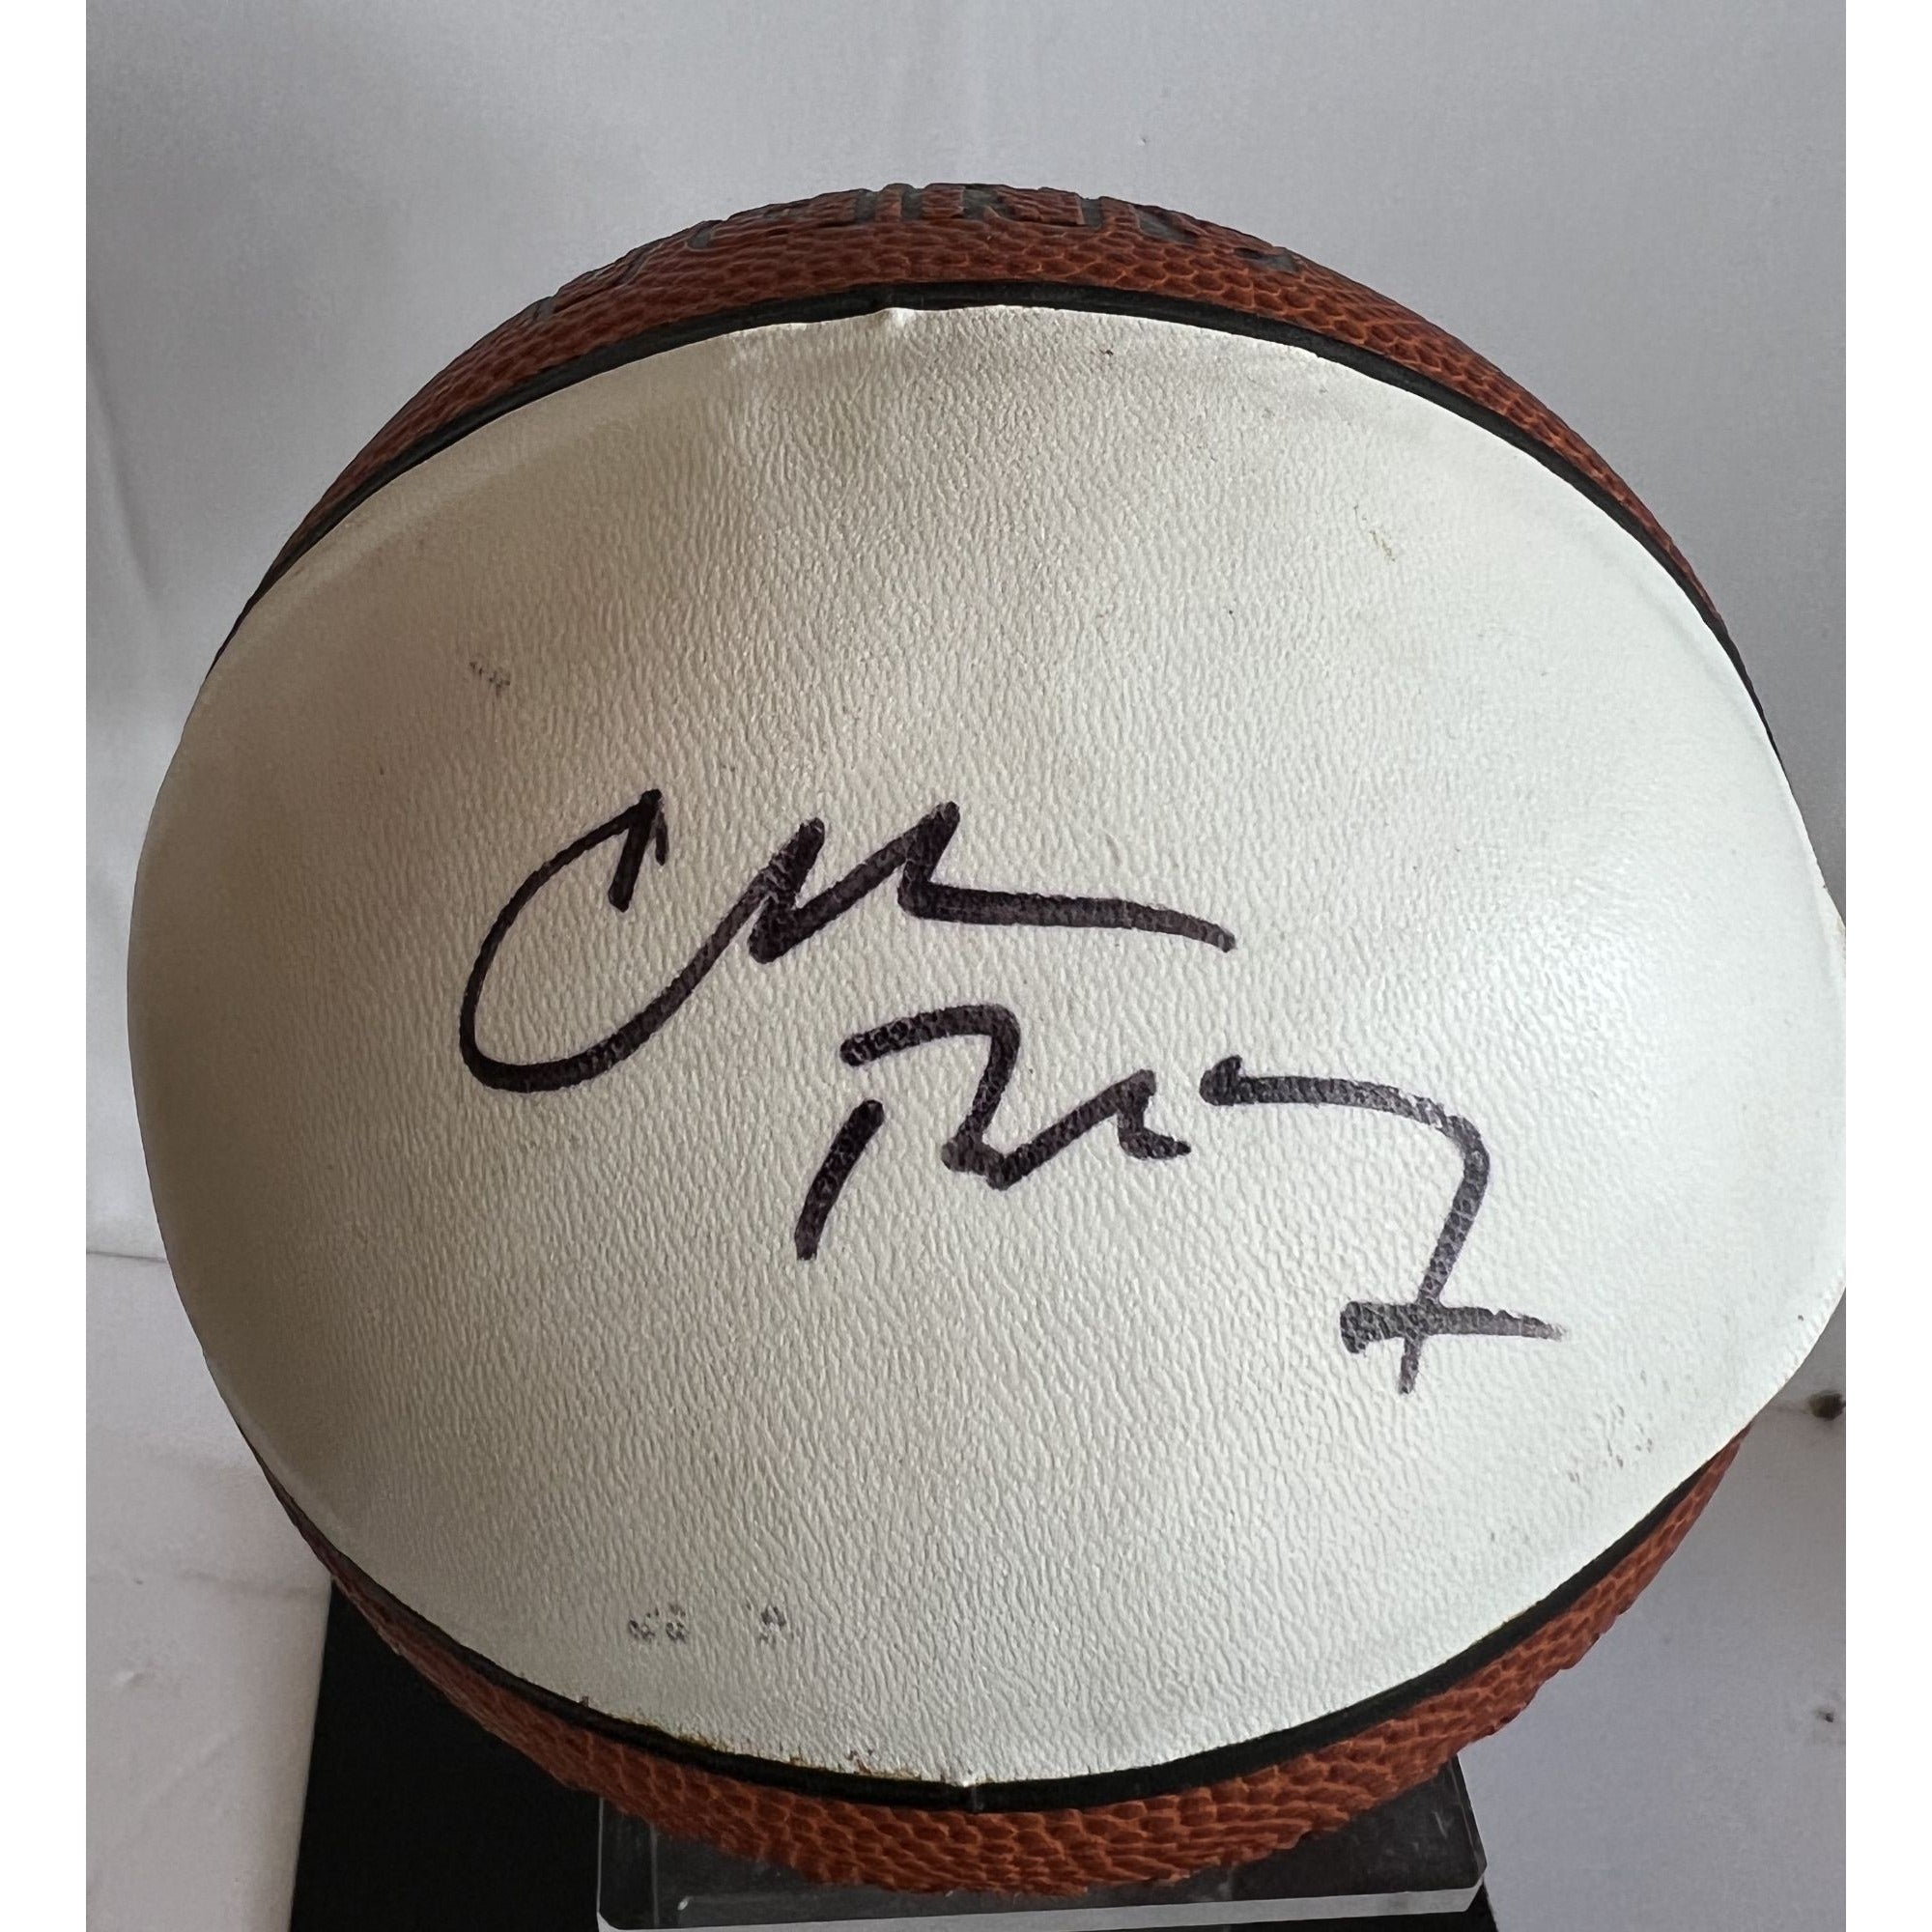 Charles Barkley mini basketball signed with proof and free acrylic display case